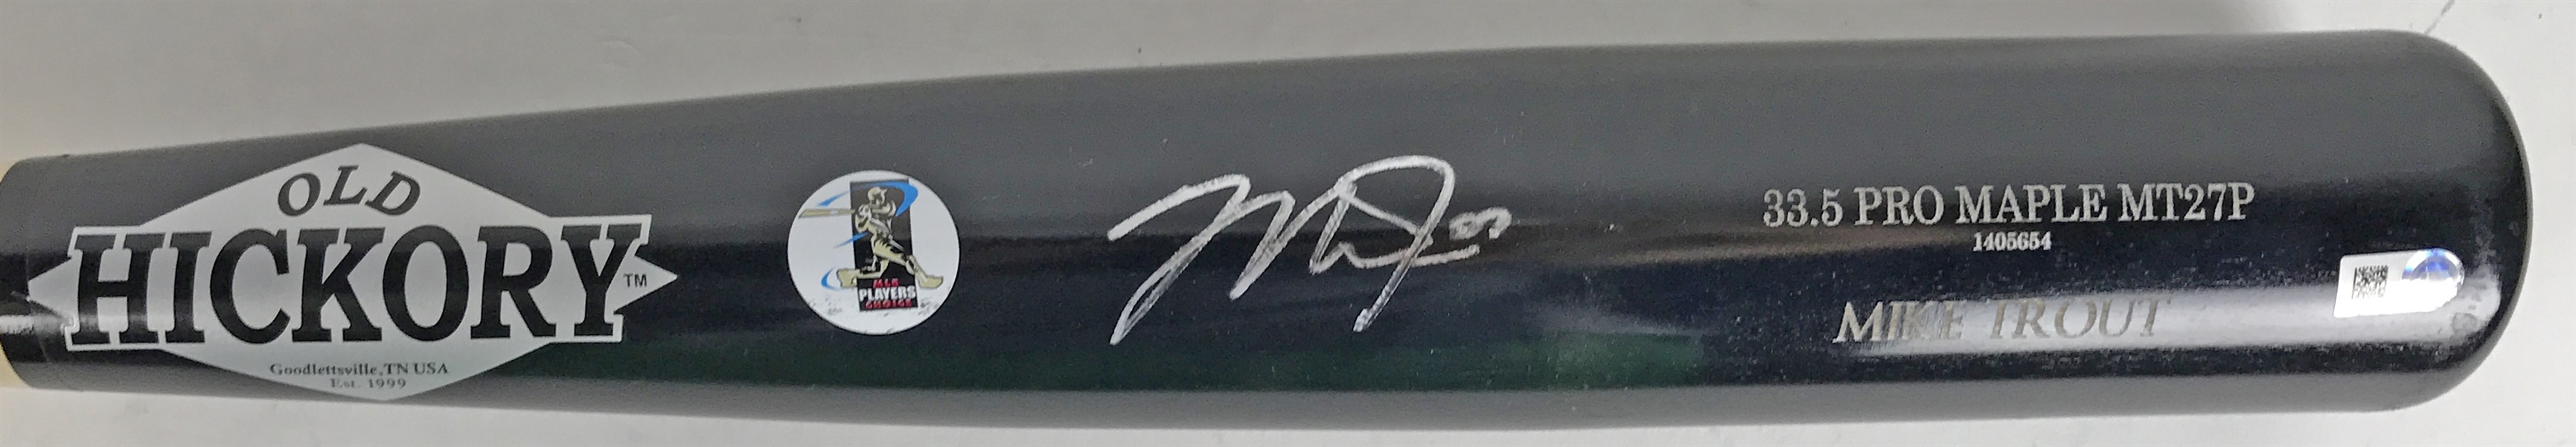 Mike Trout Signed Personal Model Old Hickory Maple Baseball Bat (MLB)